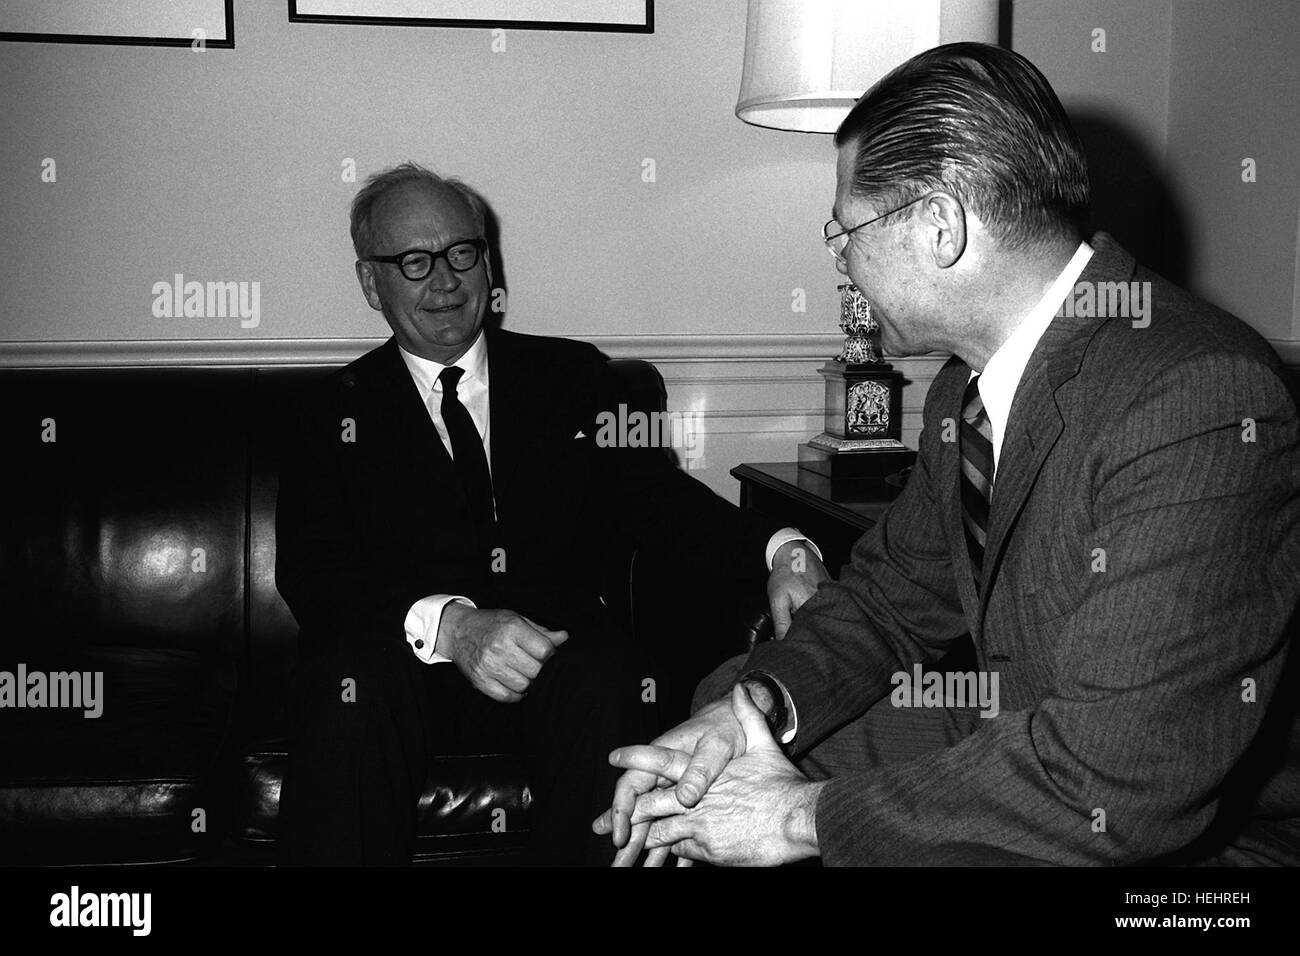 GEN Adolf Heusinger, Federal Republic of Germany, Chairman, North Atlantic Treaty Organization (NATO) Military Committee, meets with Secretary of Defense Robert S. McNamara, right, at the Pentagon to discuss defense matters relating to NATO. Adolf Heusinger Robert S. McNamara Stock Photo